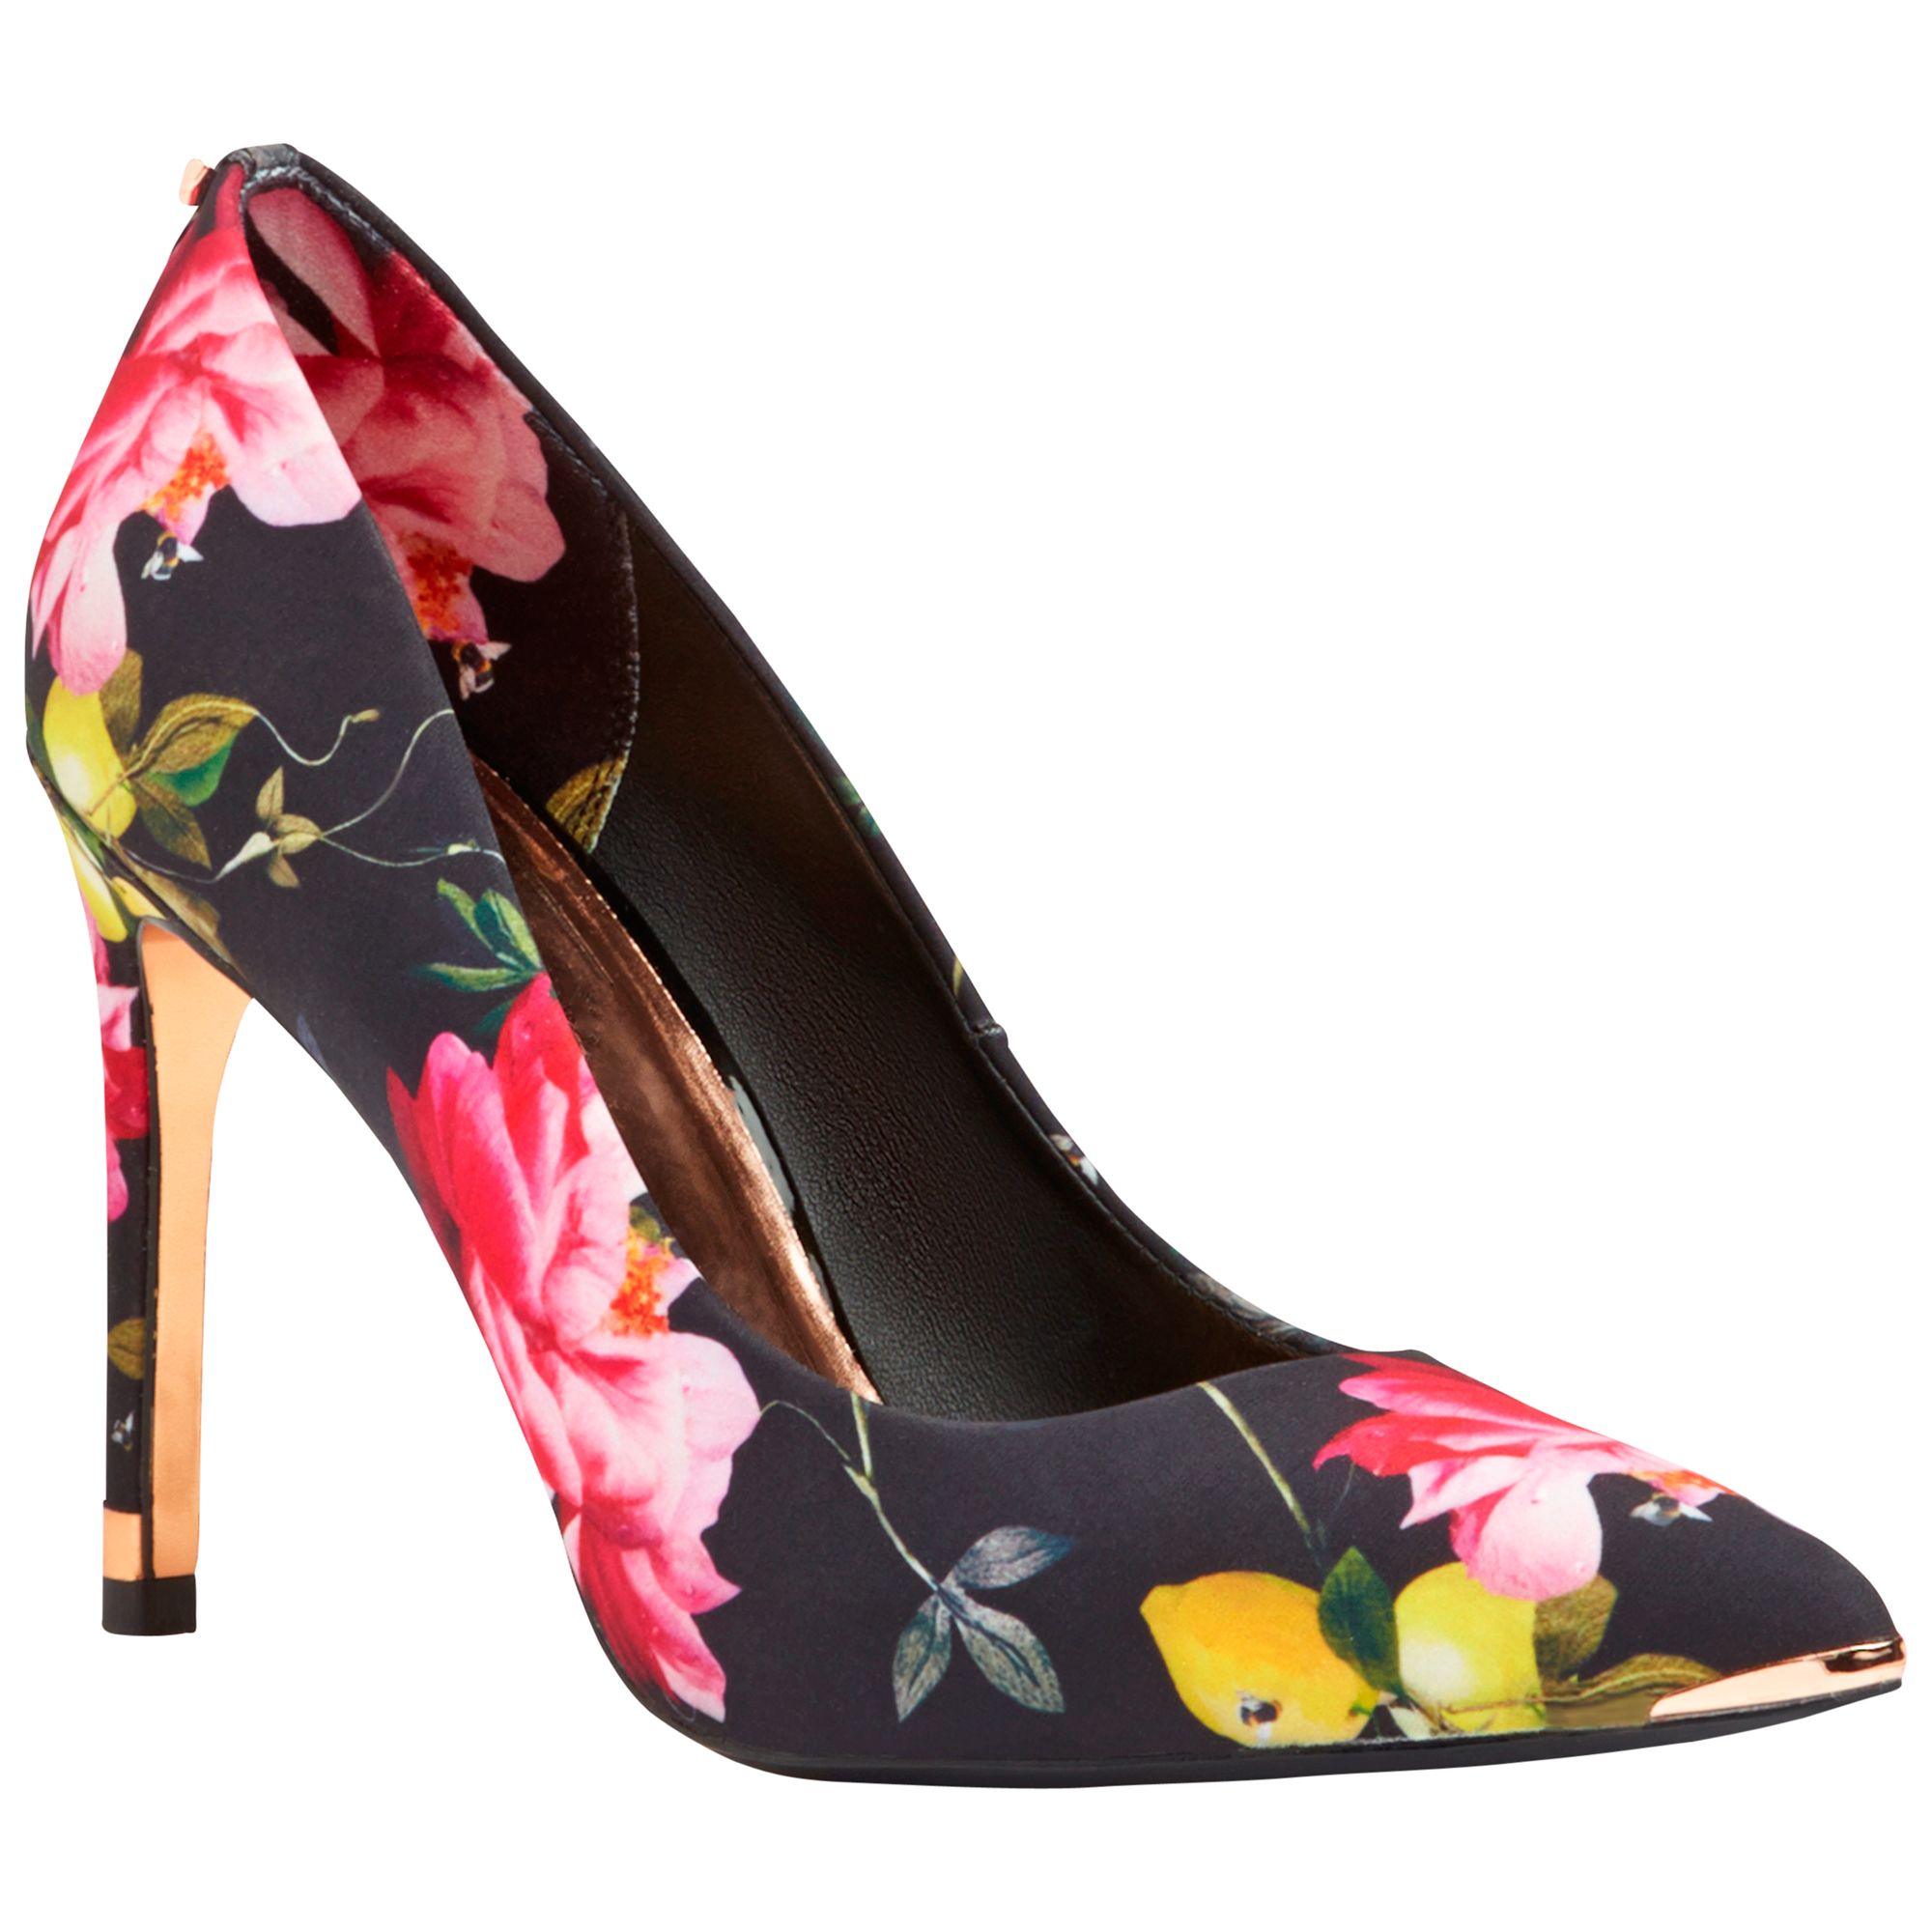 Ted Baker Neevo Pointed Court Shoes, Citrus Bloom Print